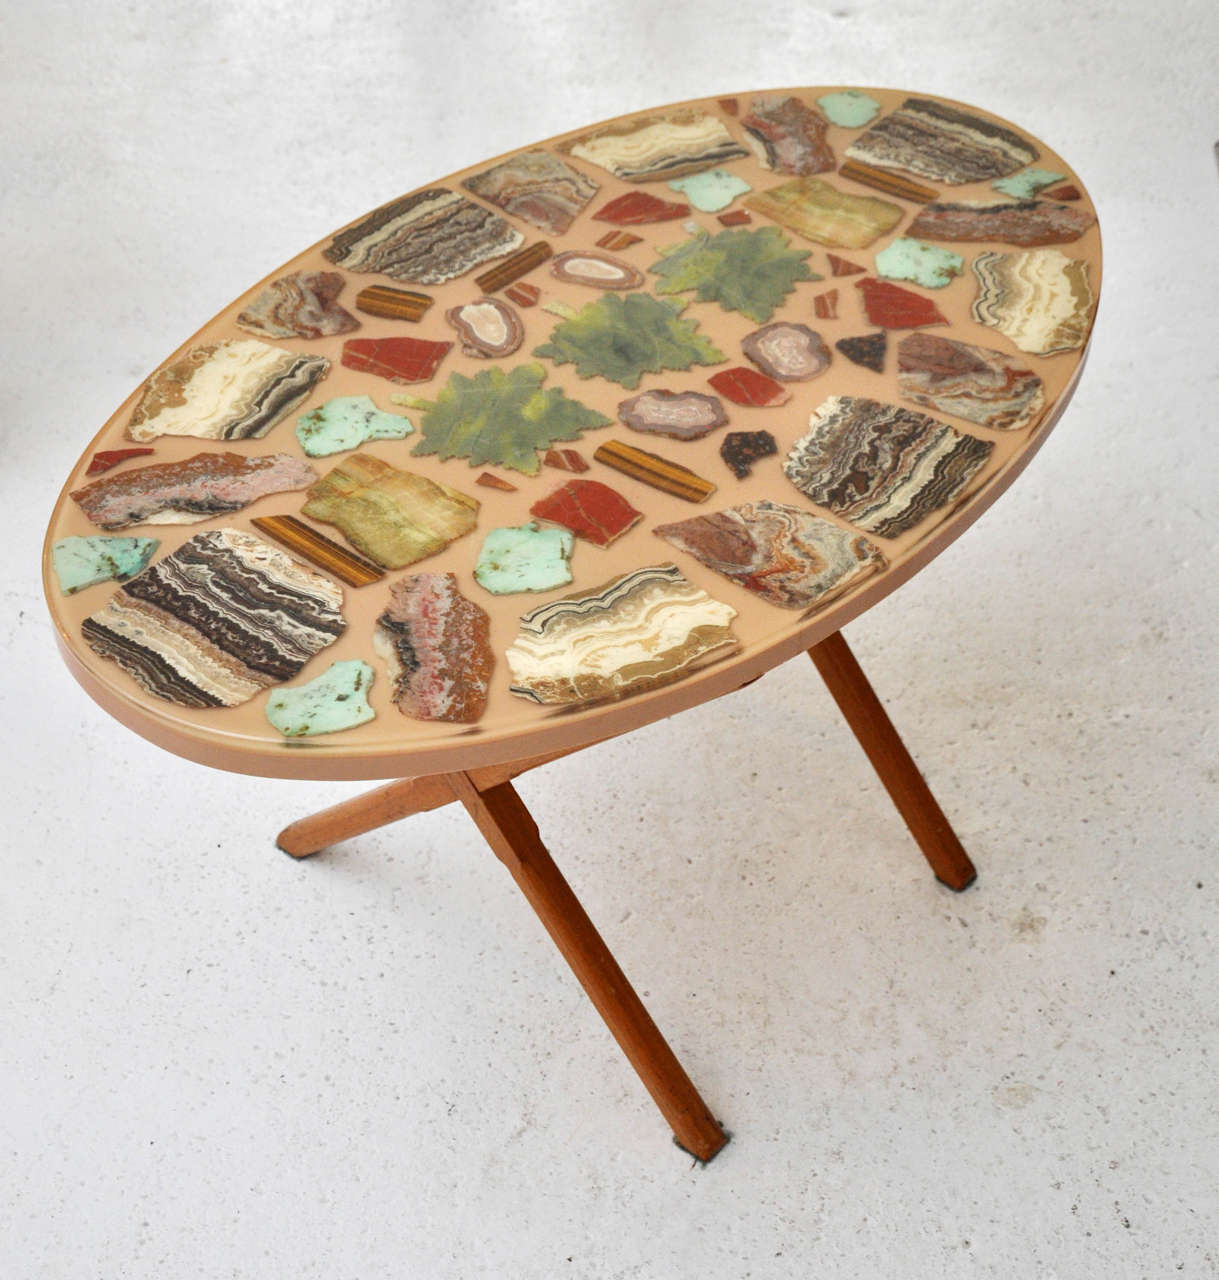 Antique oval table with varying agate slice inlays.